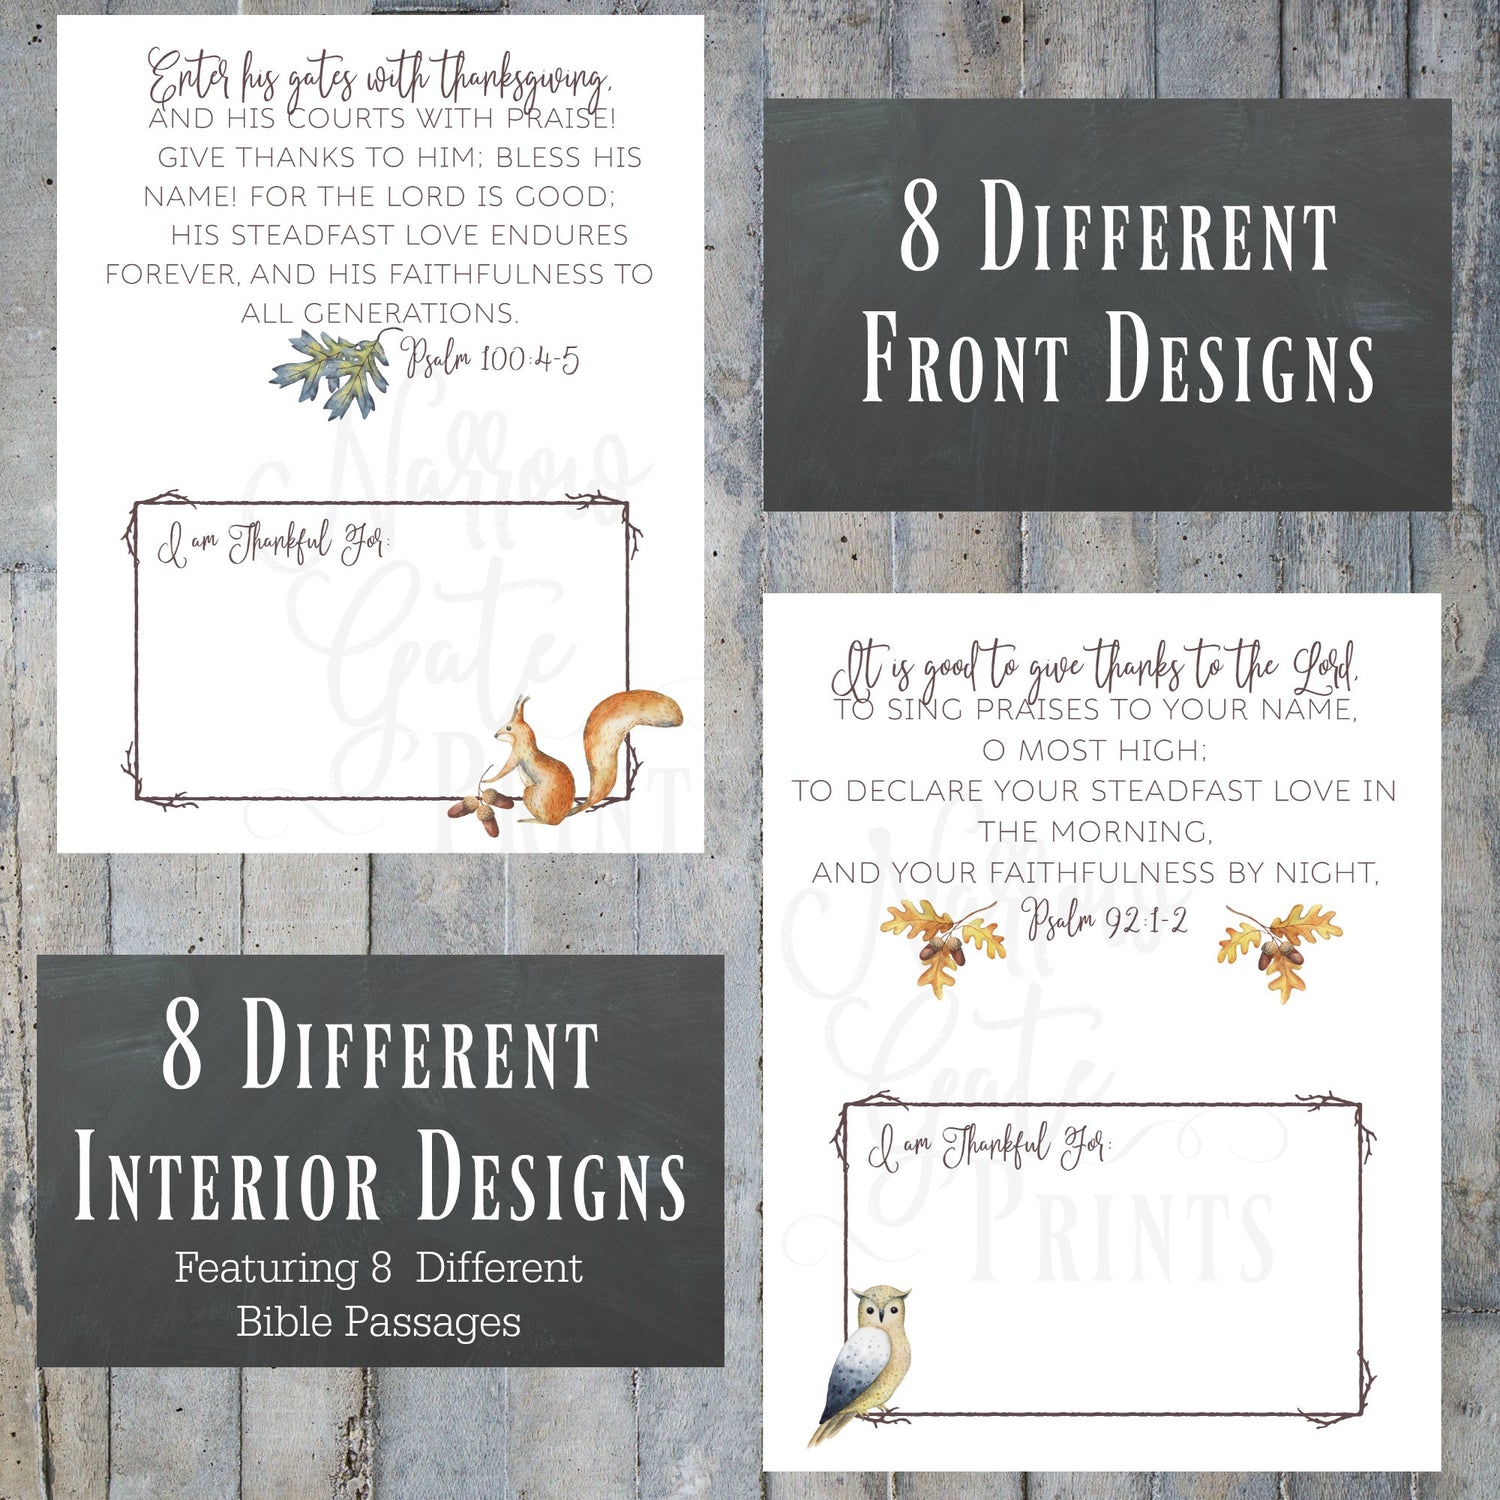 Printable Thanksgiving Place Cards, Woodland Watercolor Set, Instant Download